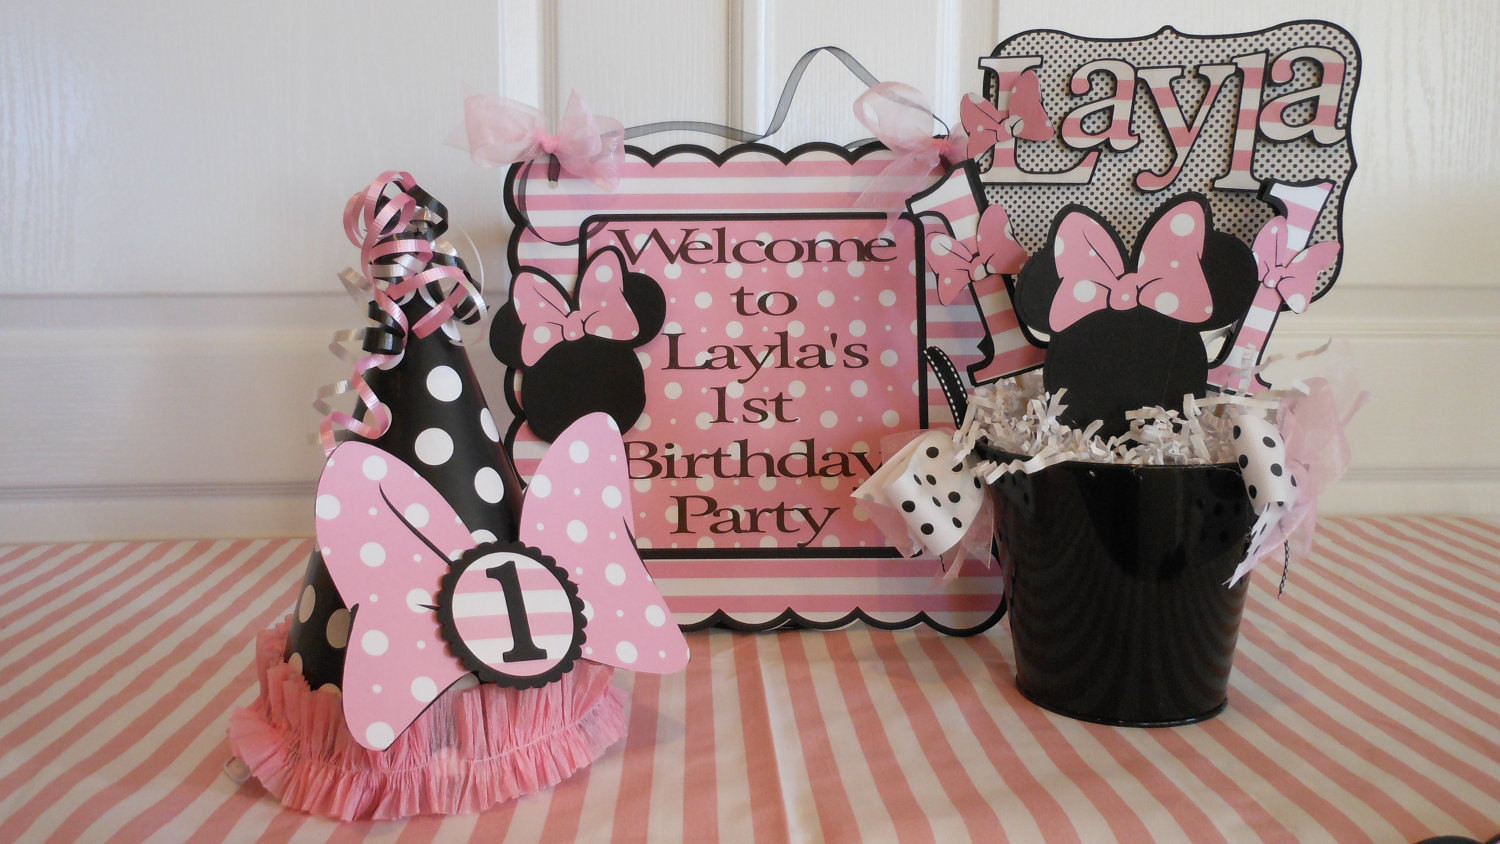 Minnie Mouse First Birthday Party Ideas
 Minnie Mouse Polka Dot 1st Birthday Party by ASweetCelebration